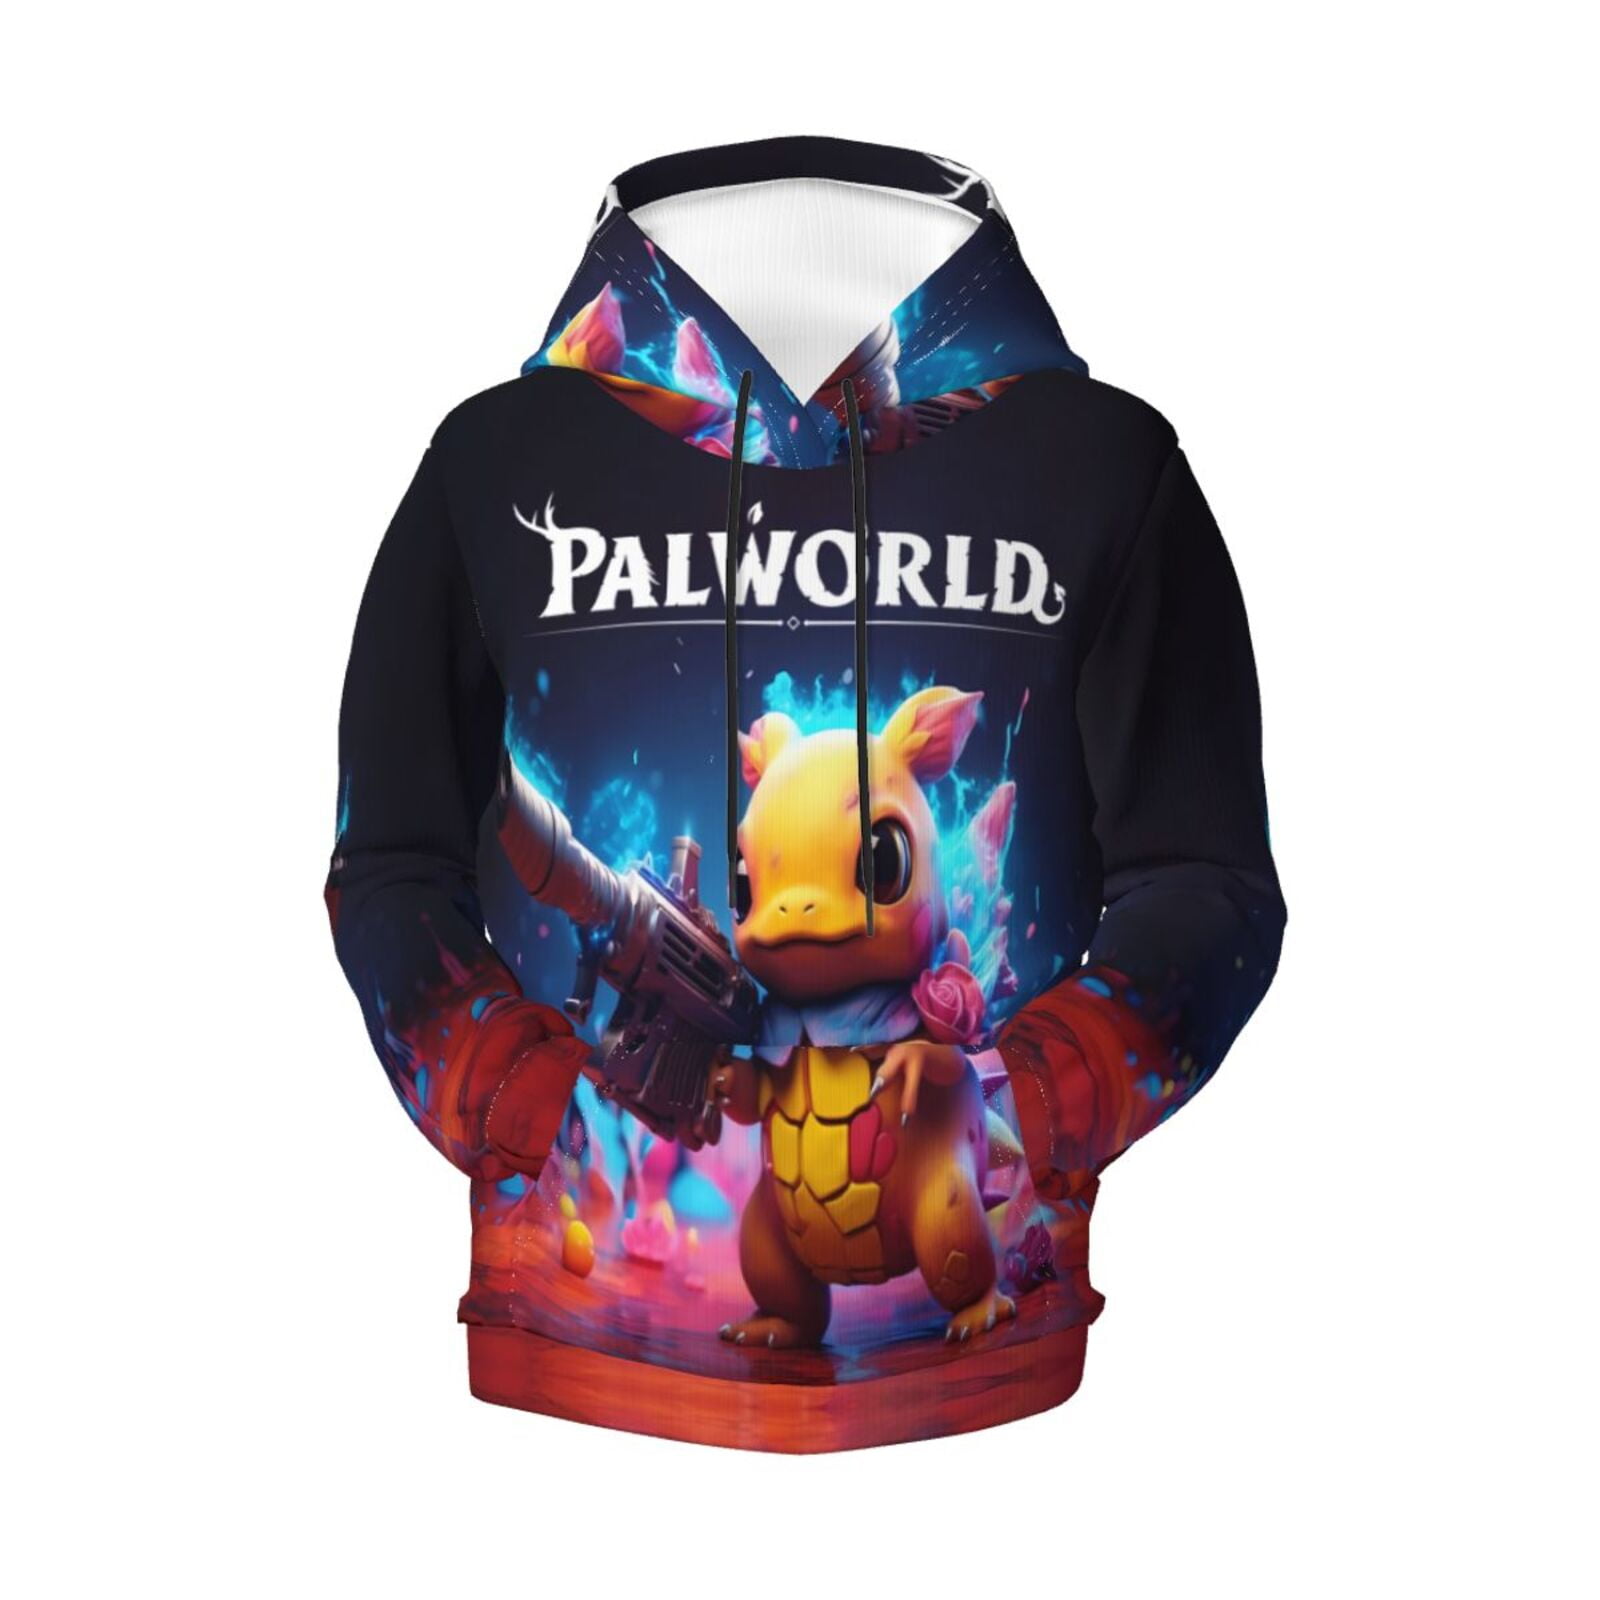 Boys Girls Palworld Pullover Hoodies 3D Print Novelty Colorful Kids ...